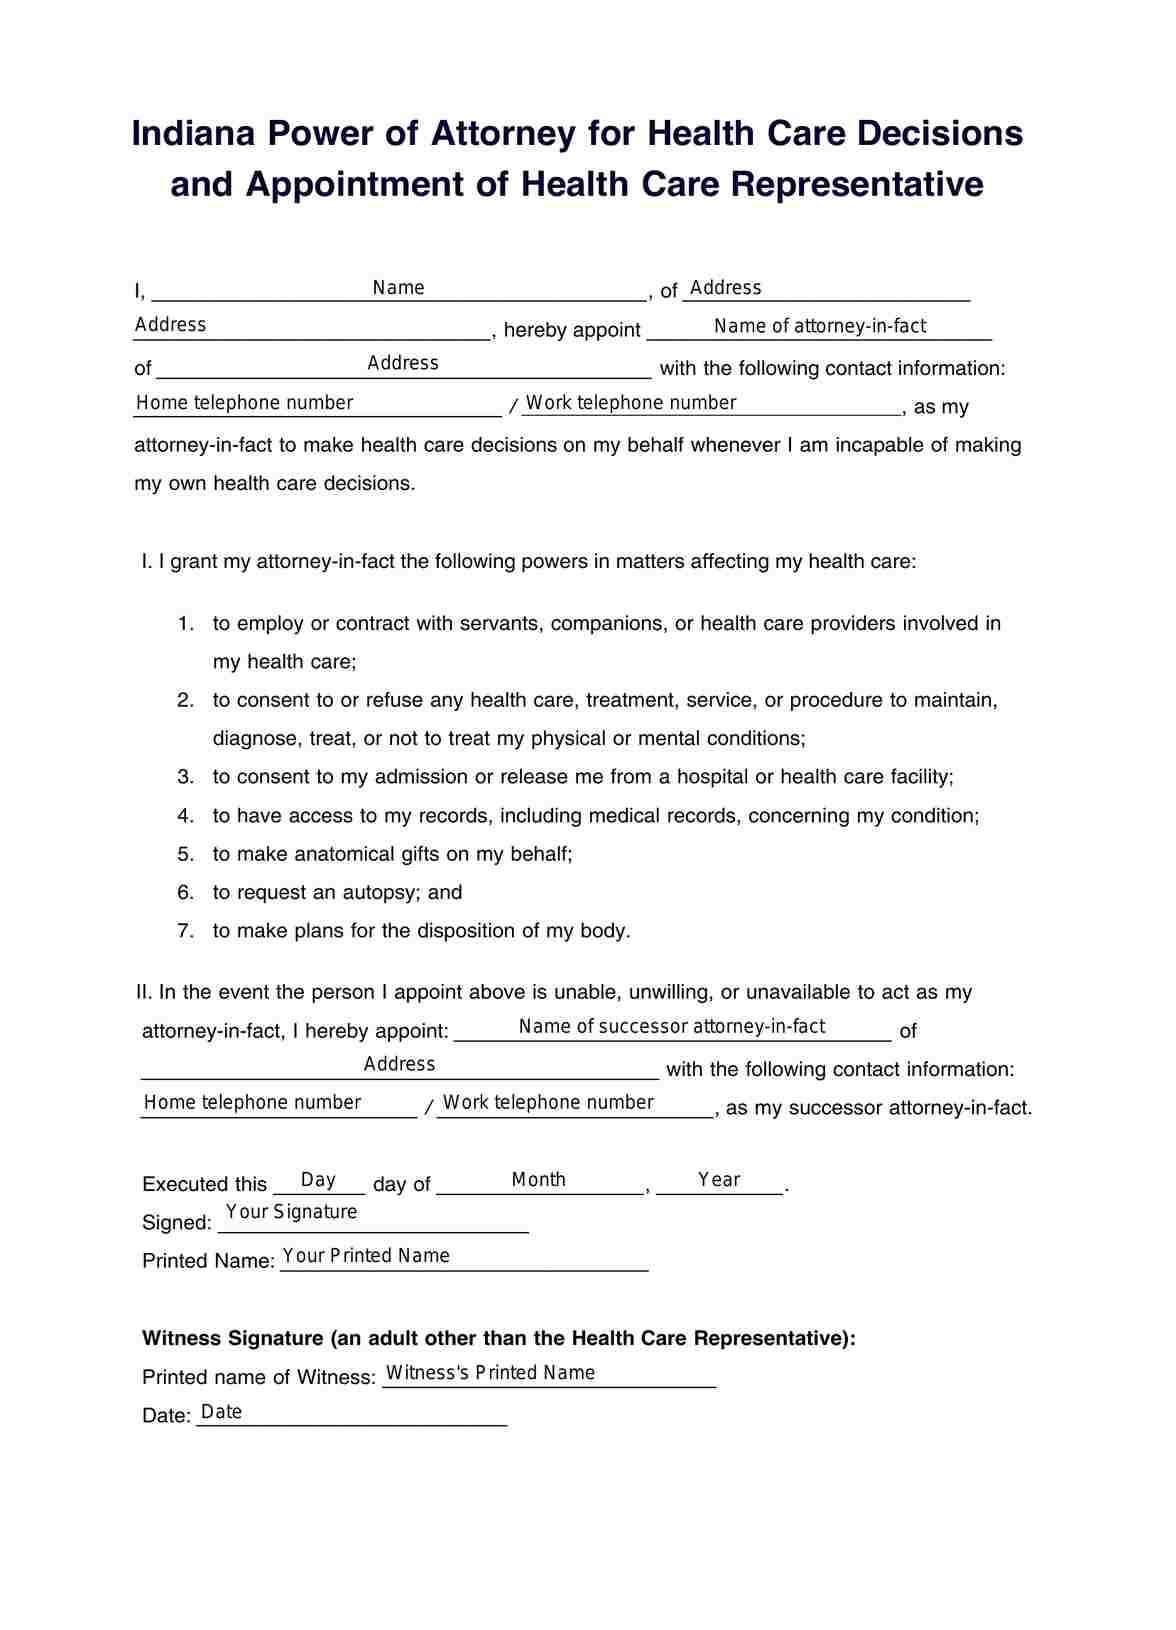 Indiana Medical Power of Attorney Form PDF Example